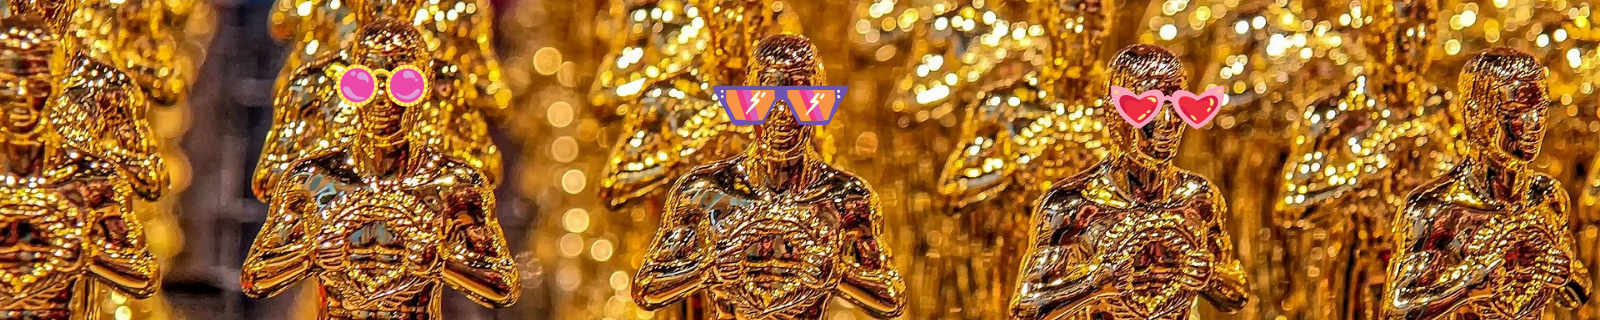 Oscar golden statuettes in rows and 3 have funky sunglasses illustrations on face